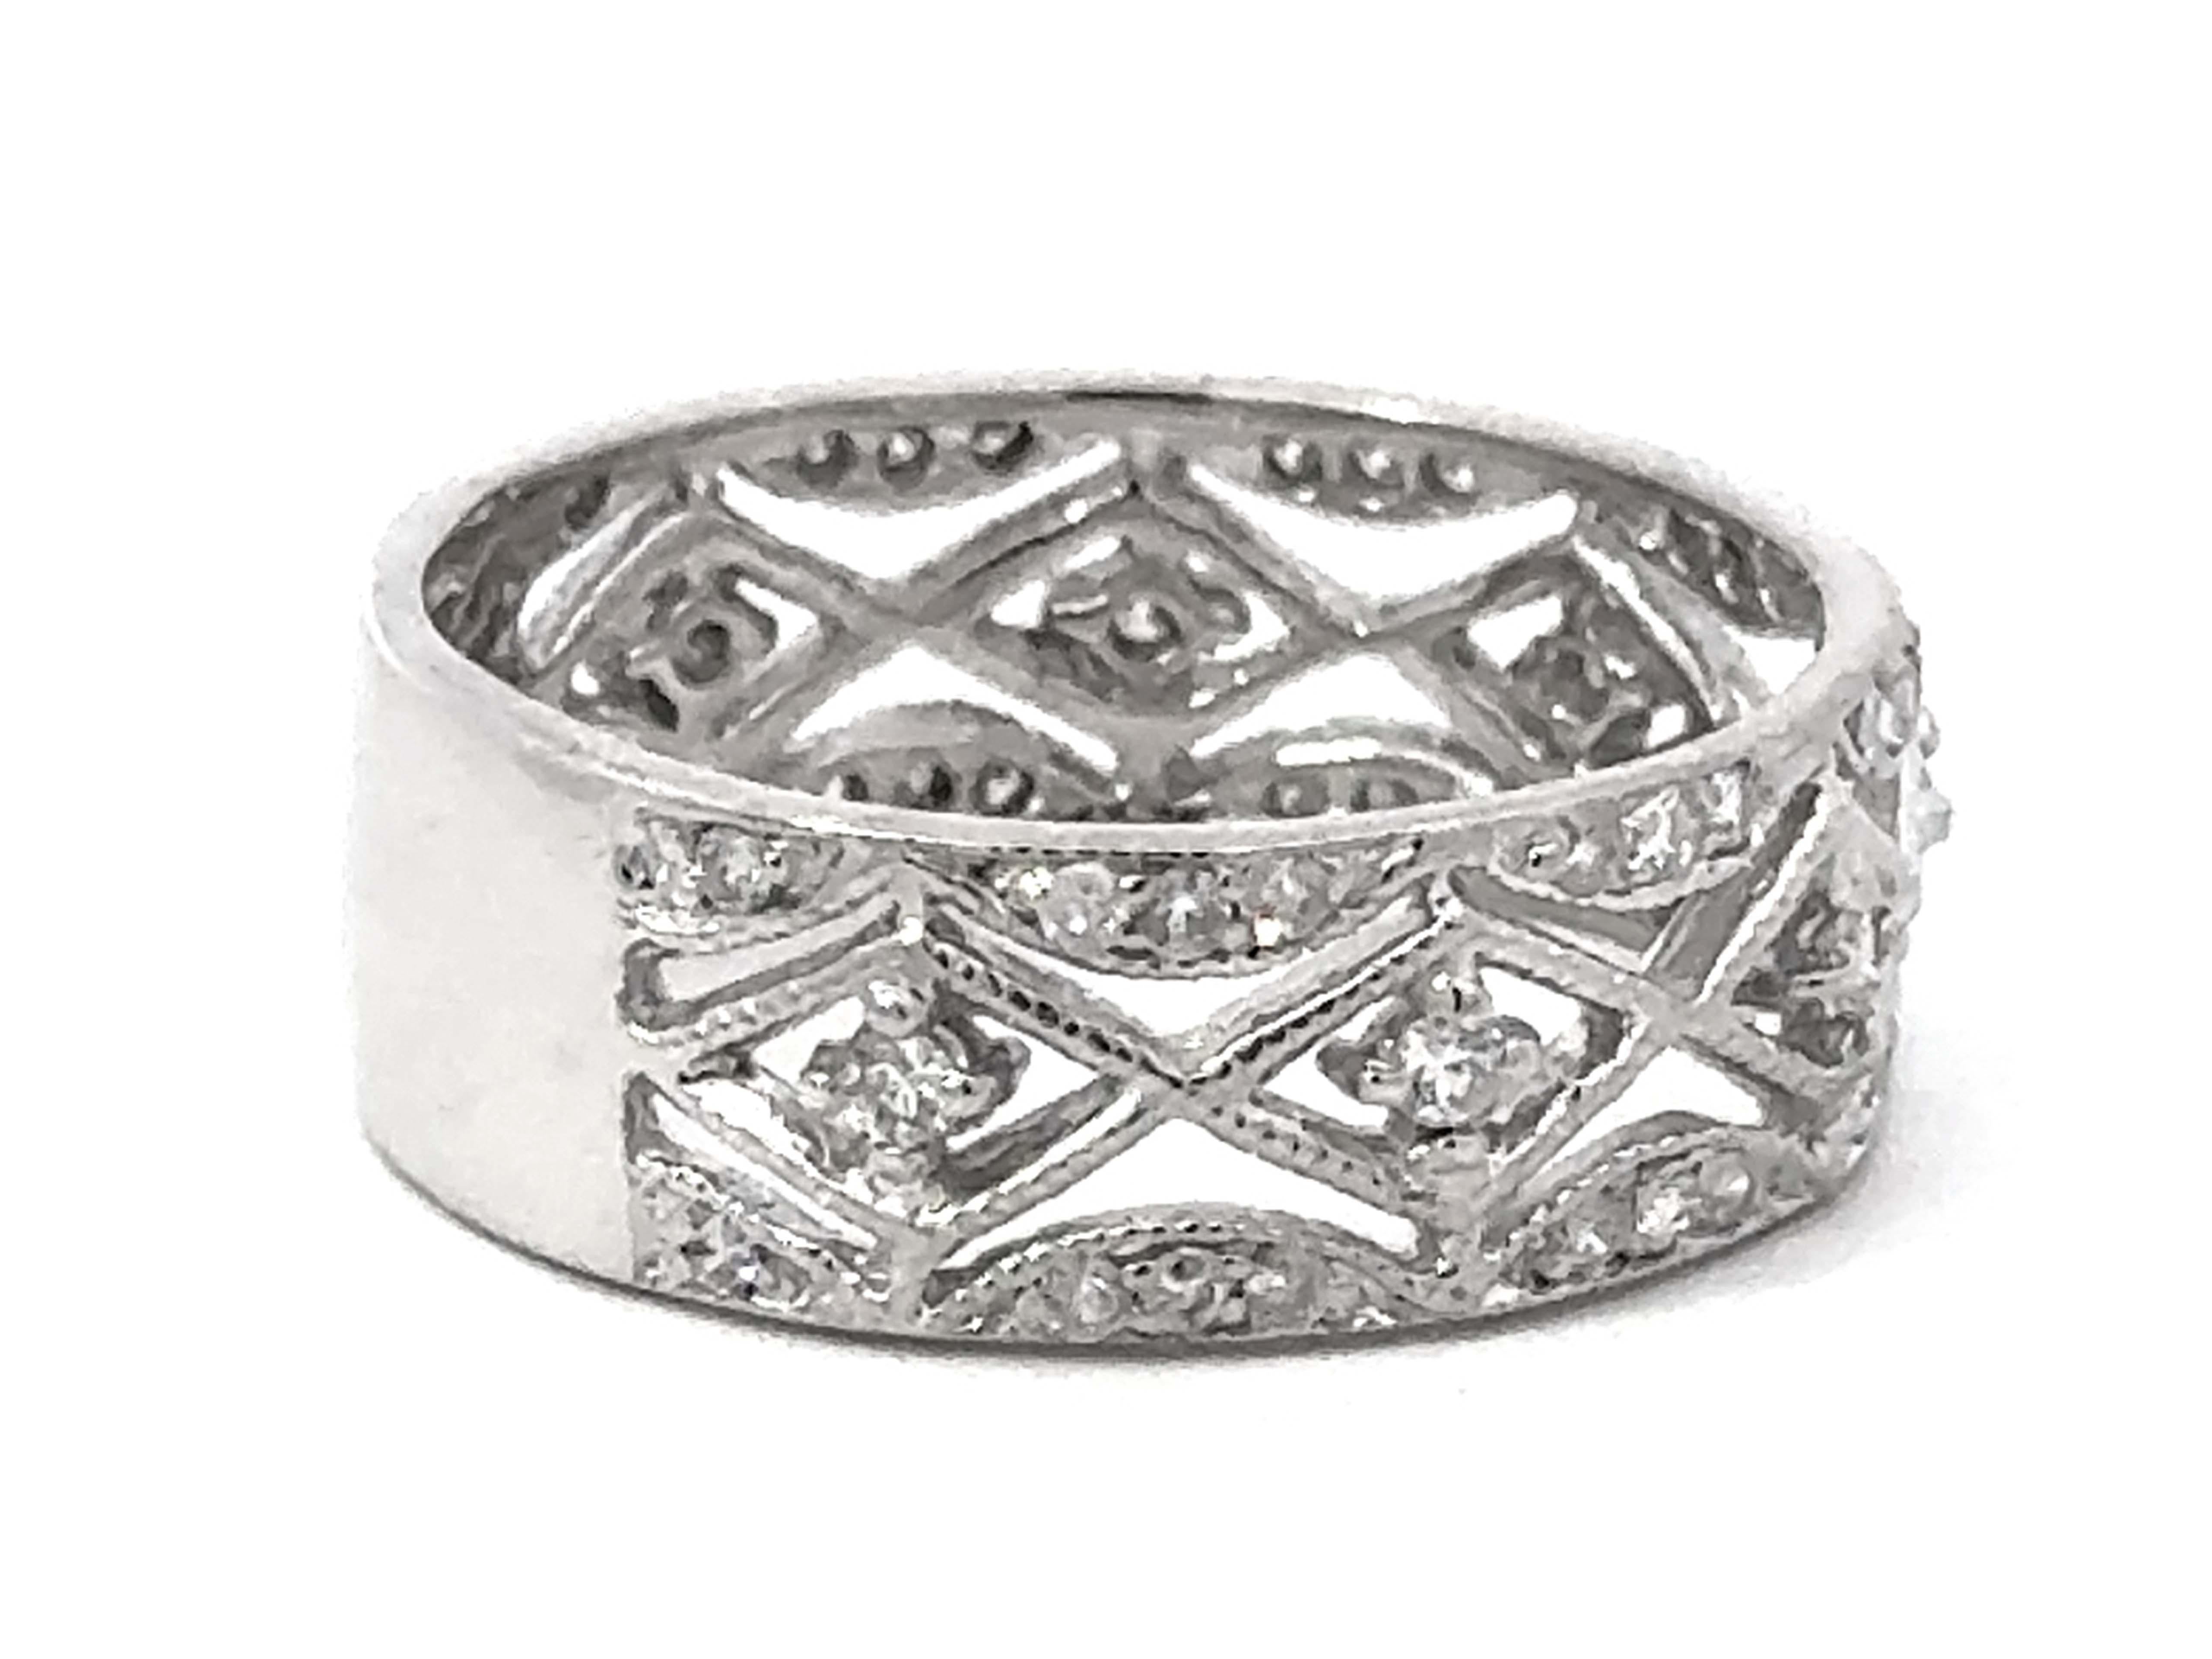 XOXO Diamond Band Cutout Ring 18k White Gold In Excellent Condition For Sale In Honolulu, HI